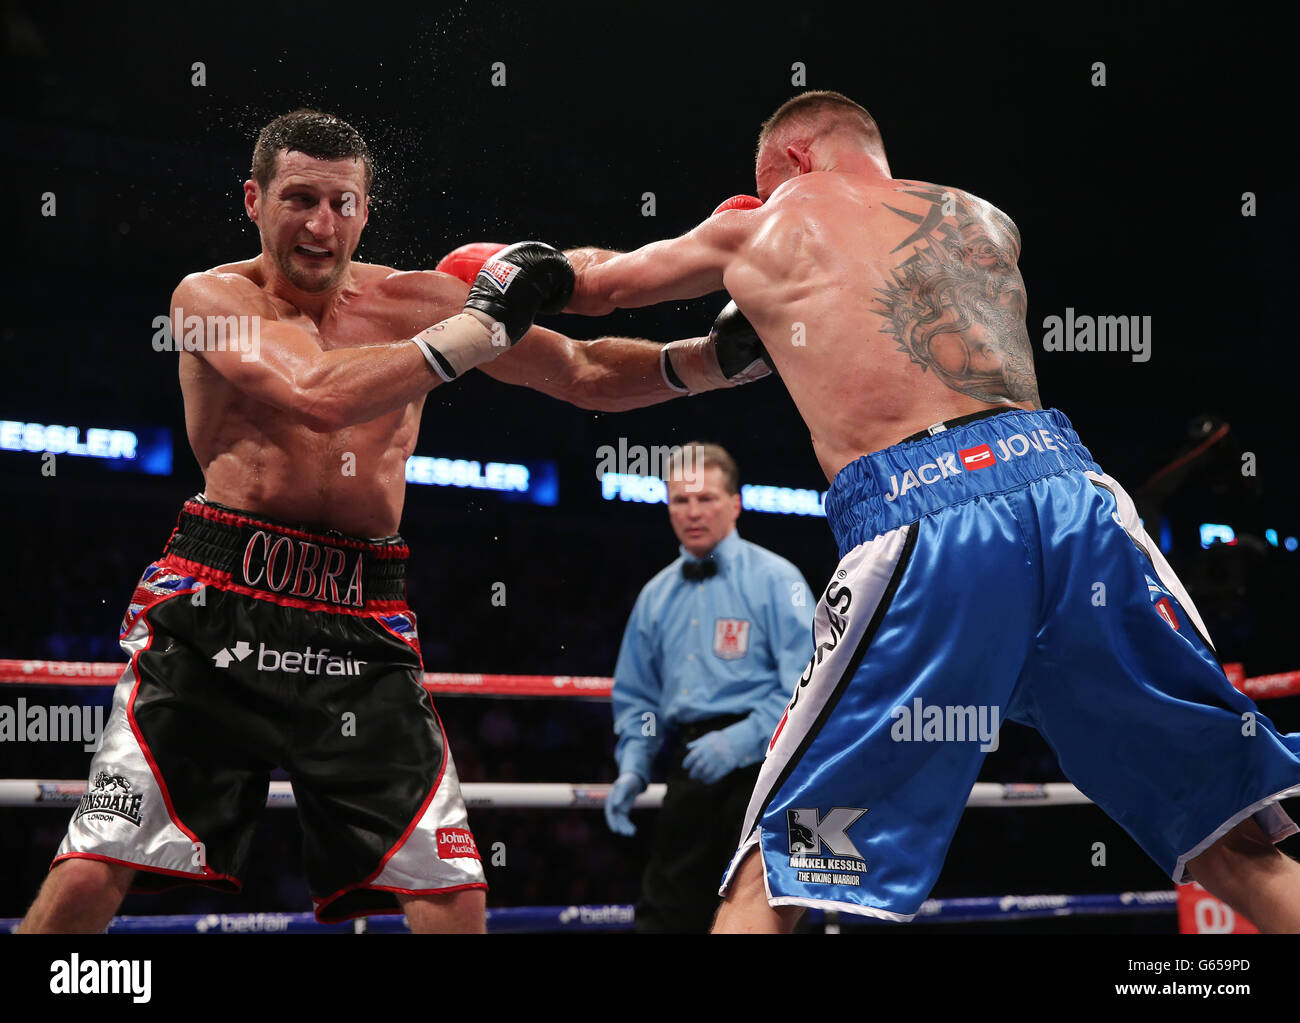 Boxing - IBF Super Middleweight Championship - Carl Froch v Mikkel Stock  Photo - Alamy